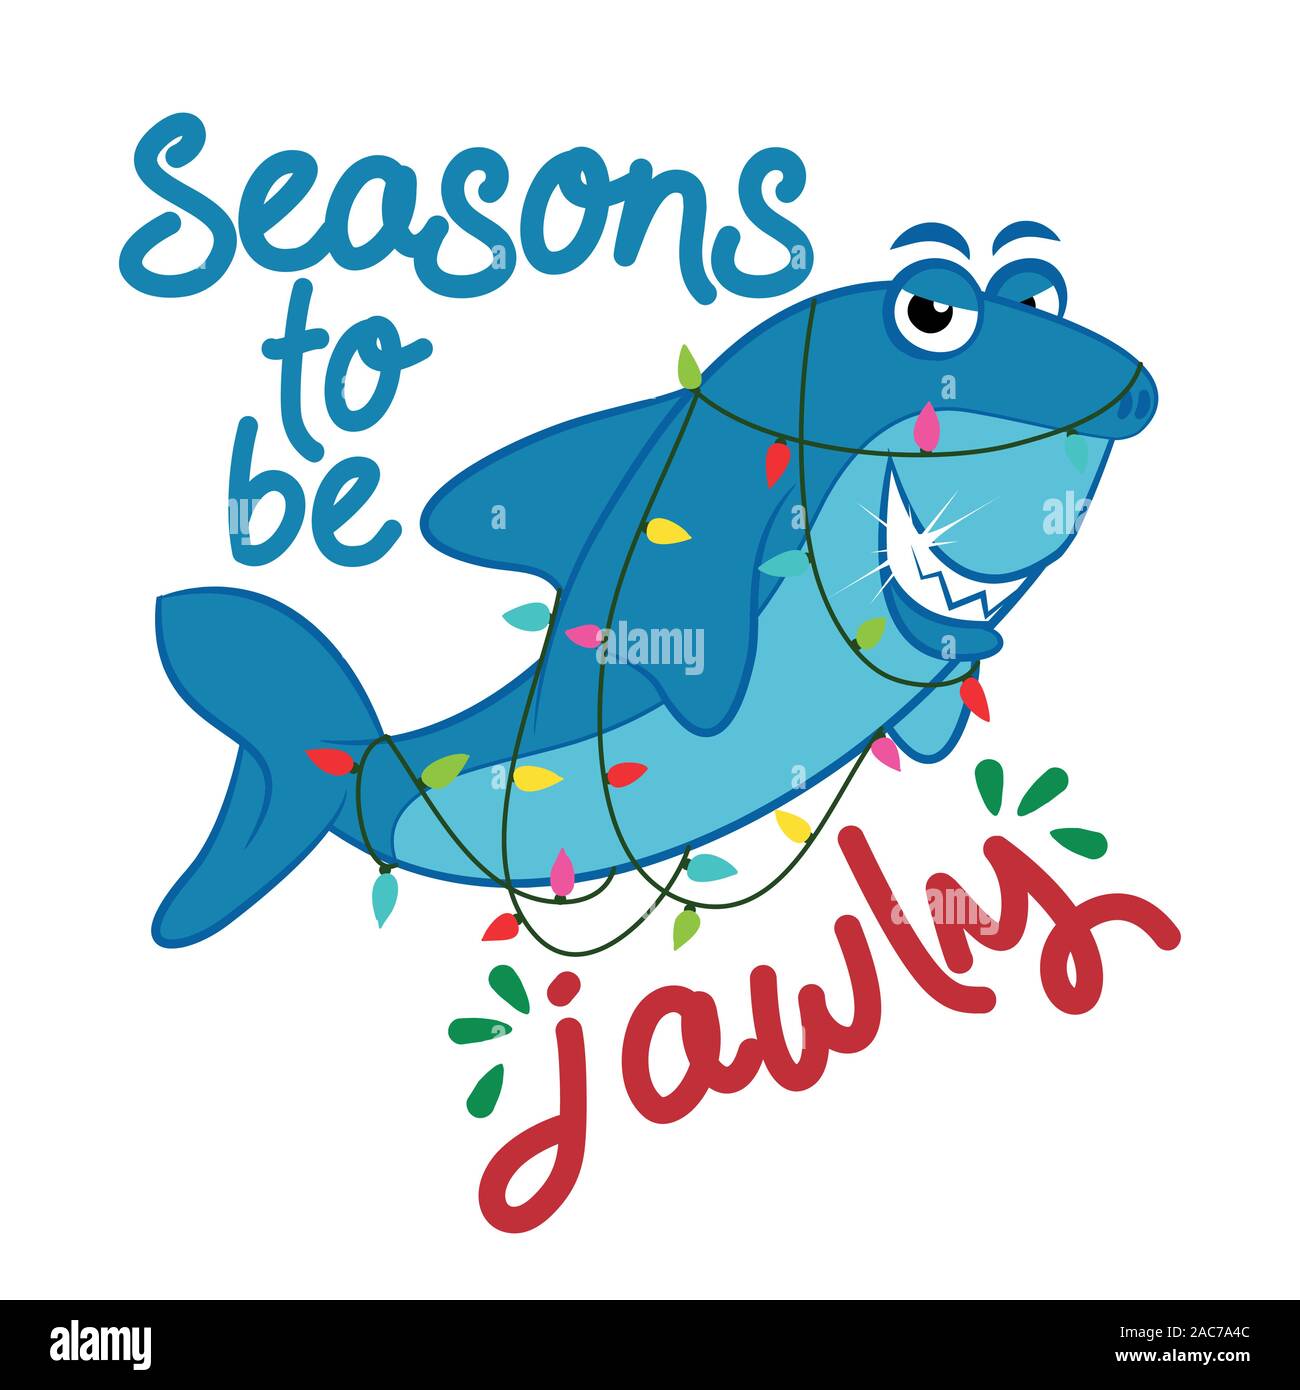 Seasons to be Jawly (jolly) - T-Shirts, Hoodie, Tank, gifts. Vector illustration text for Christmas. Inspirational quote card, invitation, banner. Kid Stock Vector